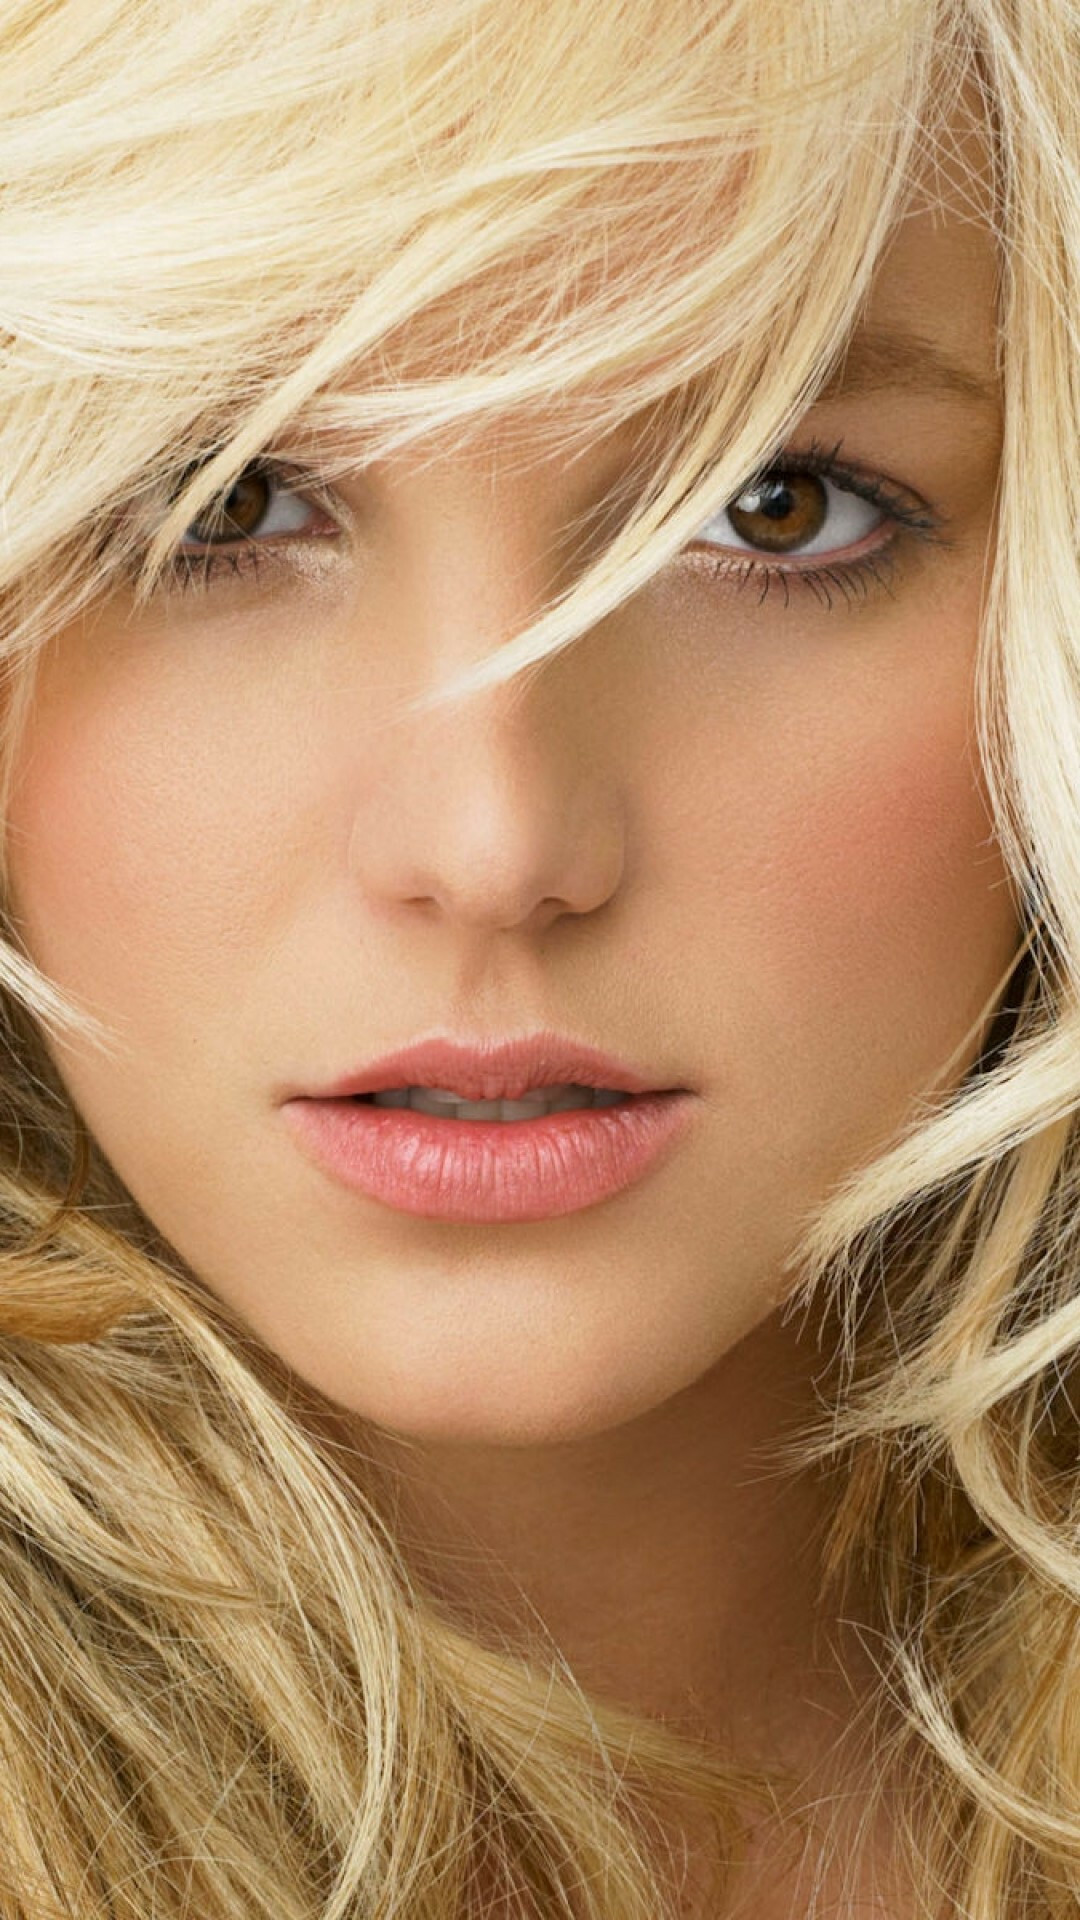 Britney Spears: A household name, Single “…Baby One More Time”. 1080x1920 Full HD Wallpaper.